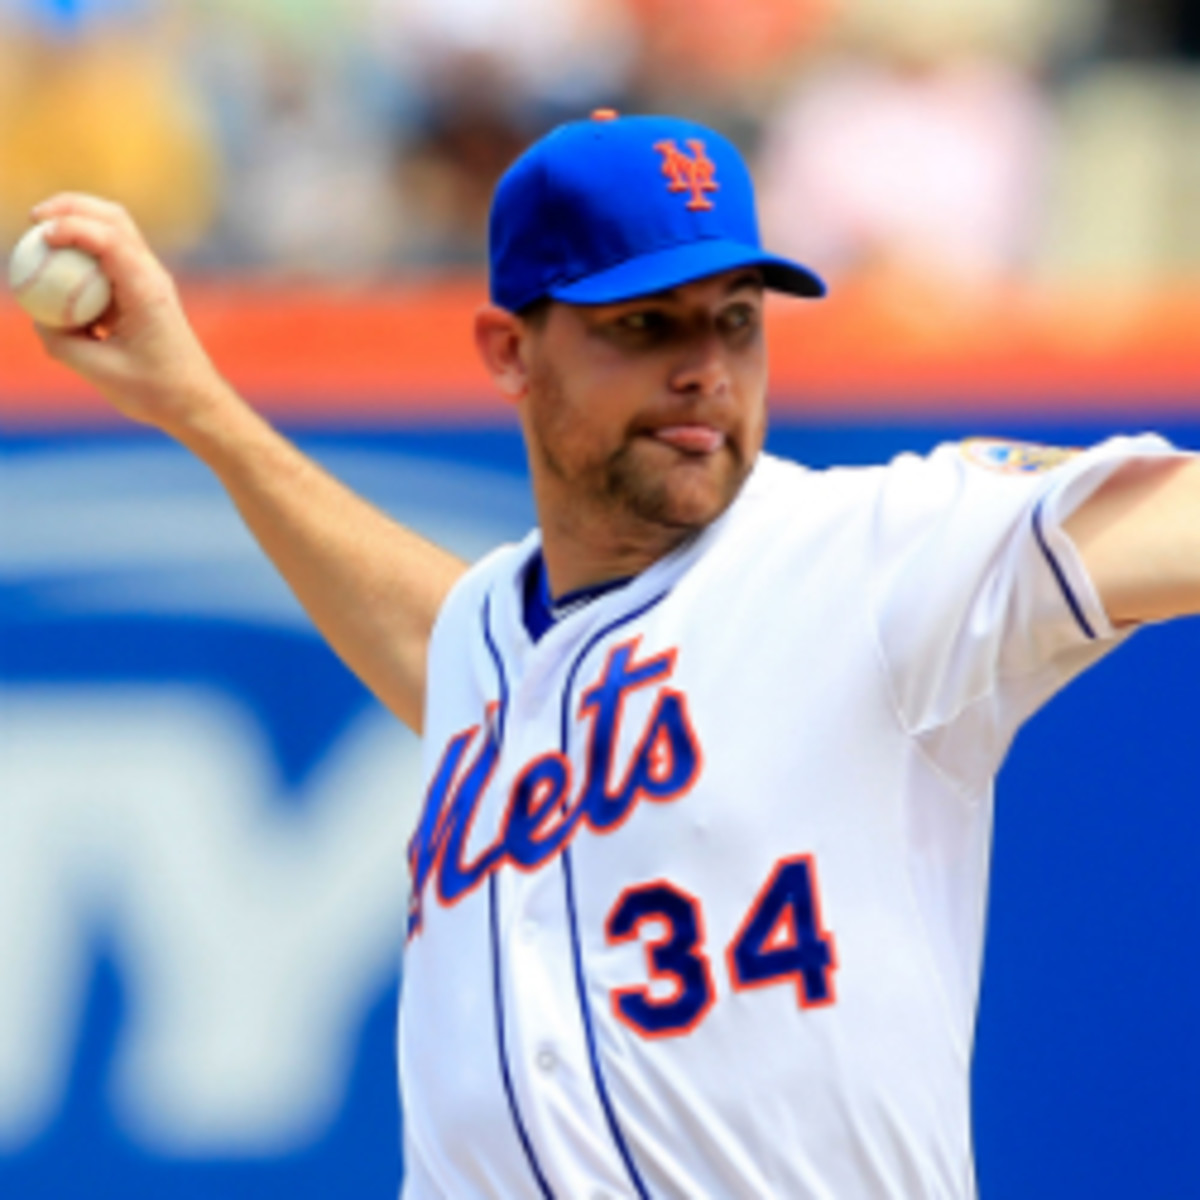 Pitcher Mike Pelfrey has signed a one-year deal with the Twins. (Chris Trotman/Getty Images)